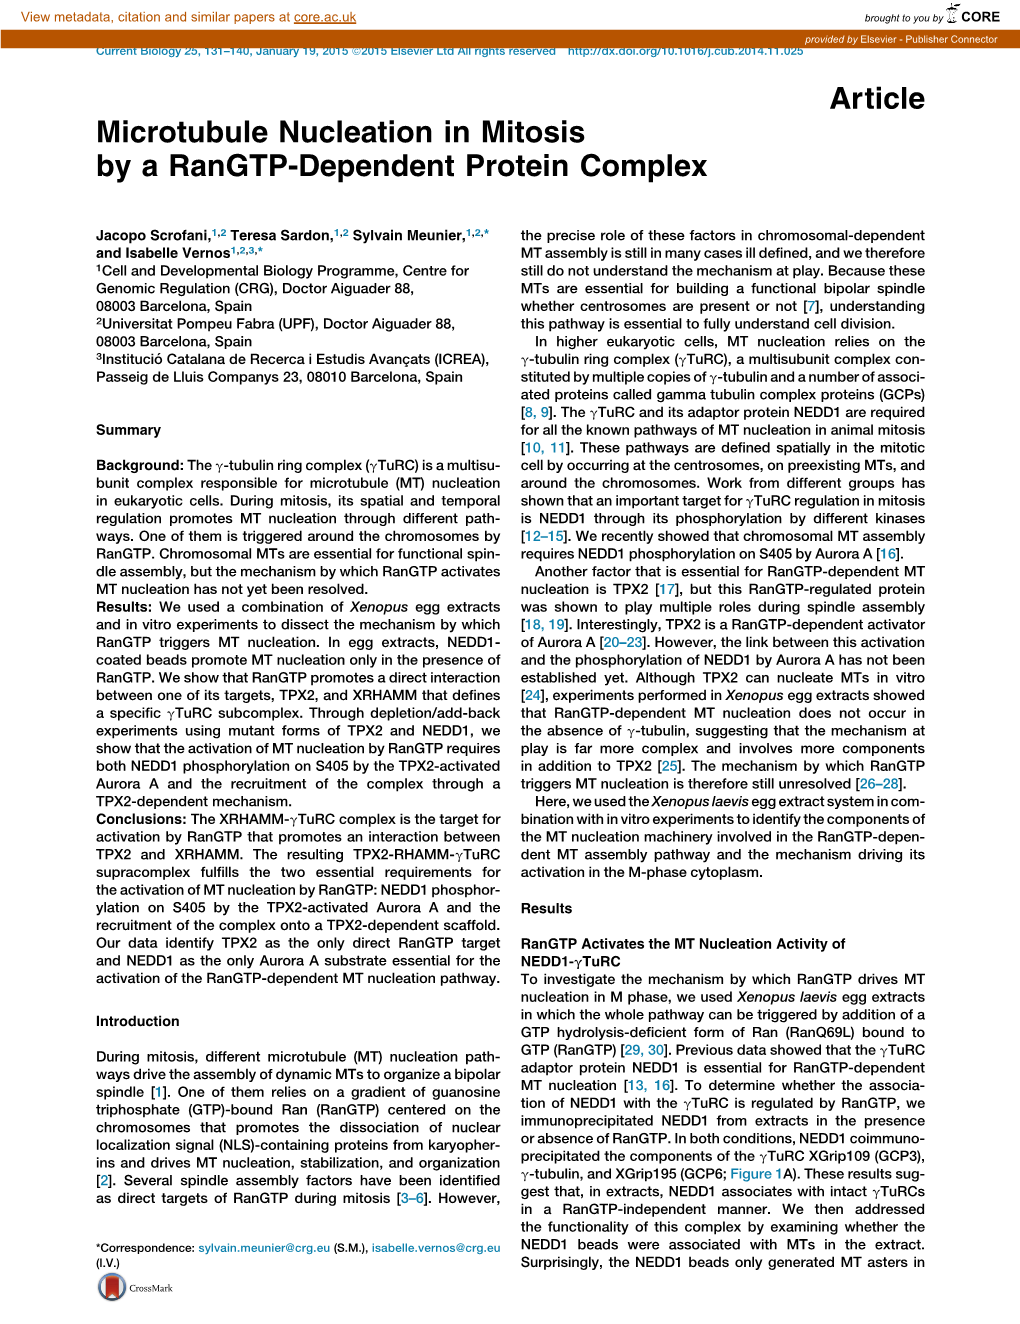 Microtubule Nucleation in Mitosis by a Rangtp-Dependent Protein Complex